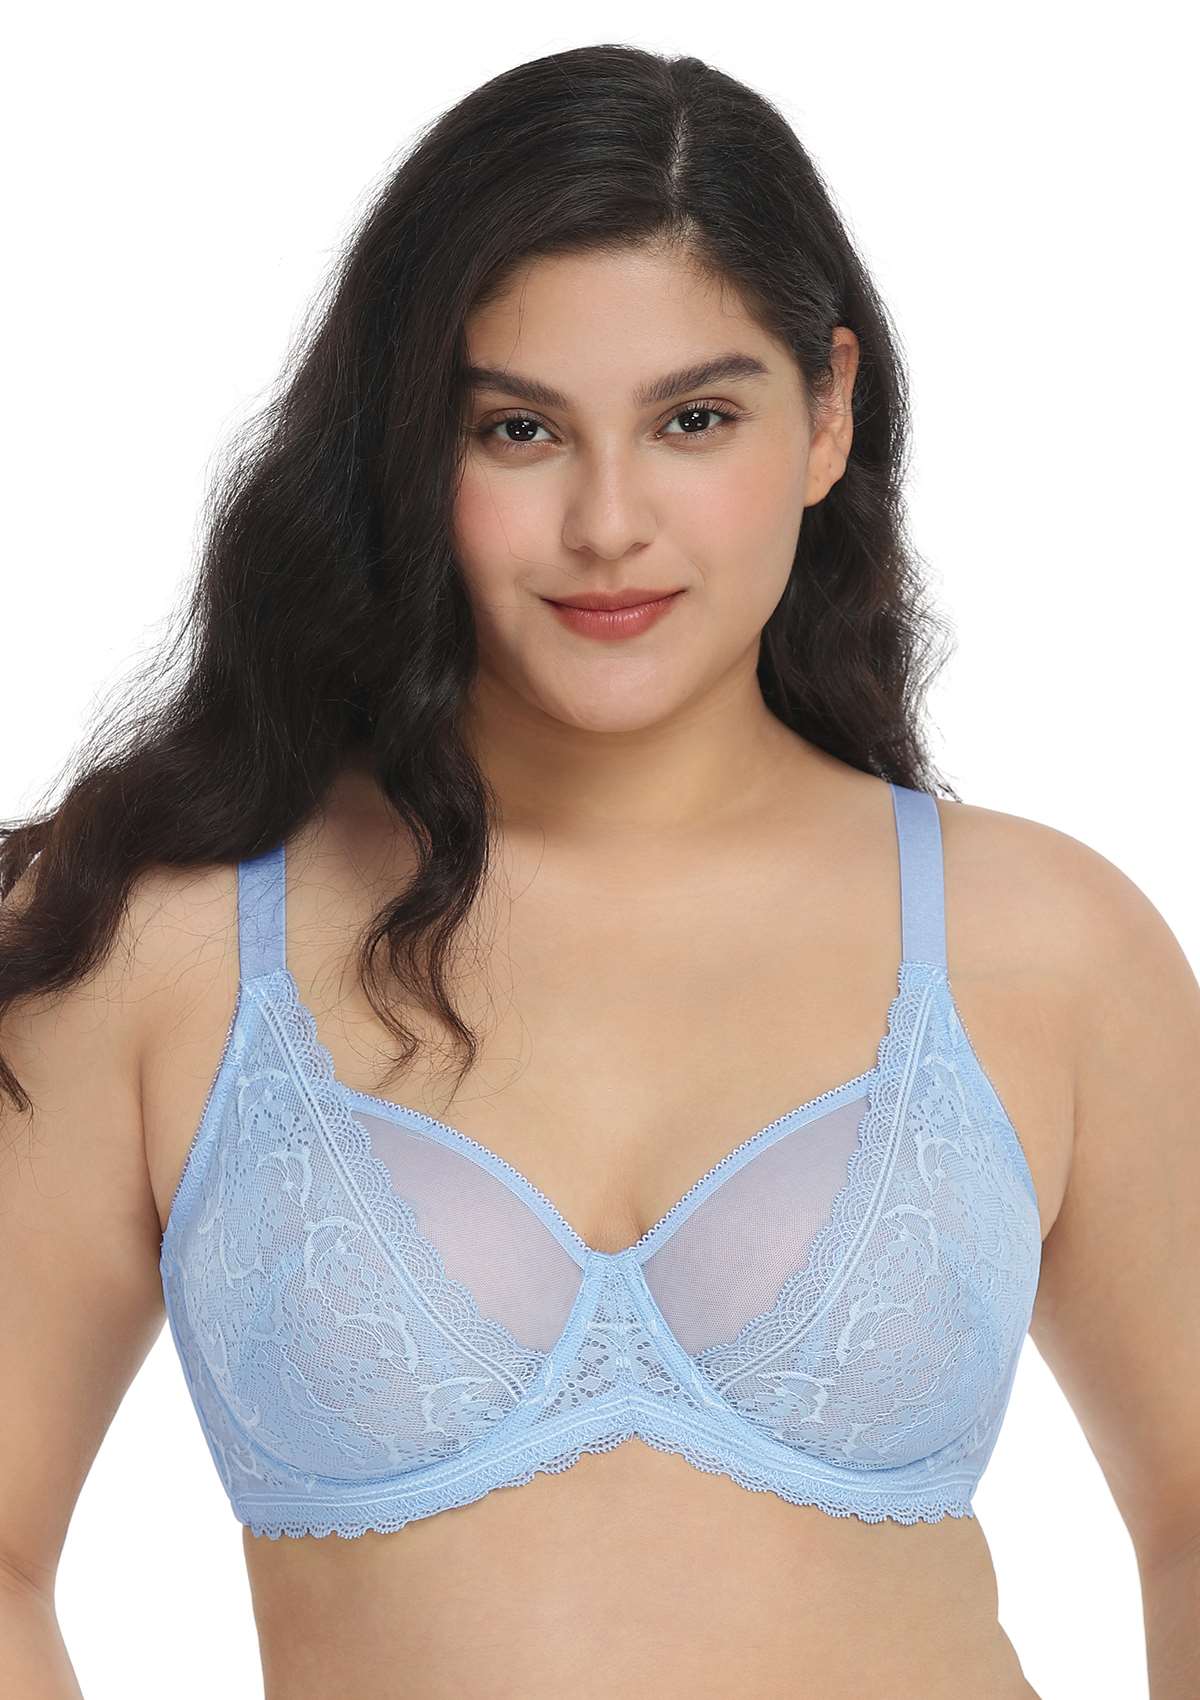 HSIA Anemone Big Bra: Best Bra For Lift And Support, Floral Bra - Light Blue / 34 / C